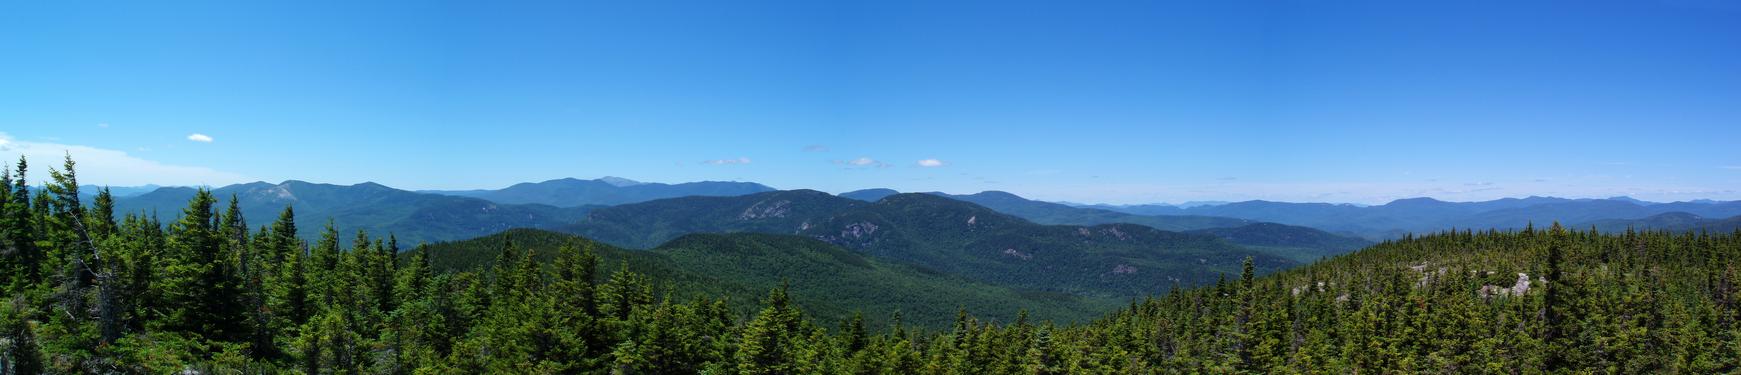 A view of the White Mountains as seen from the summit of Speckled Mountain in NH on June 200